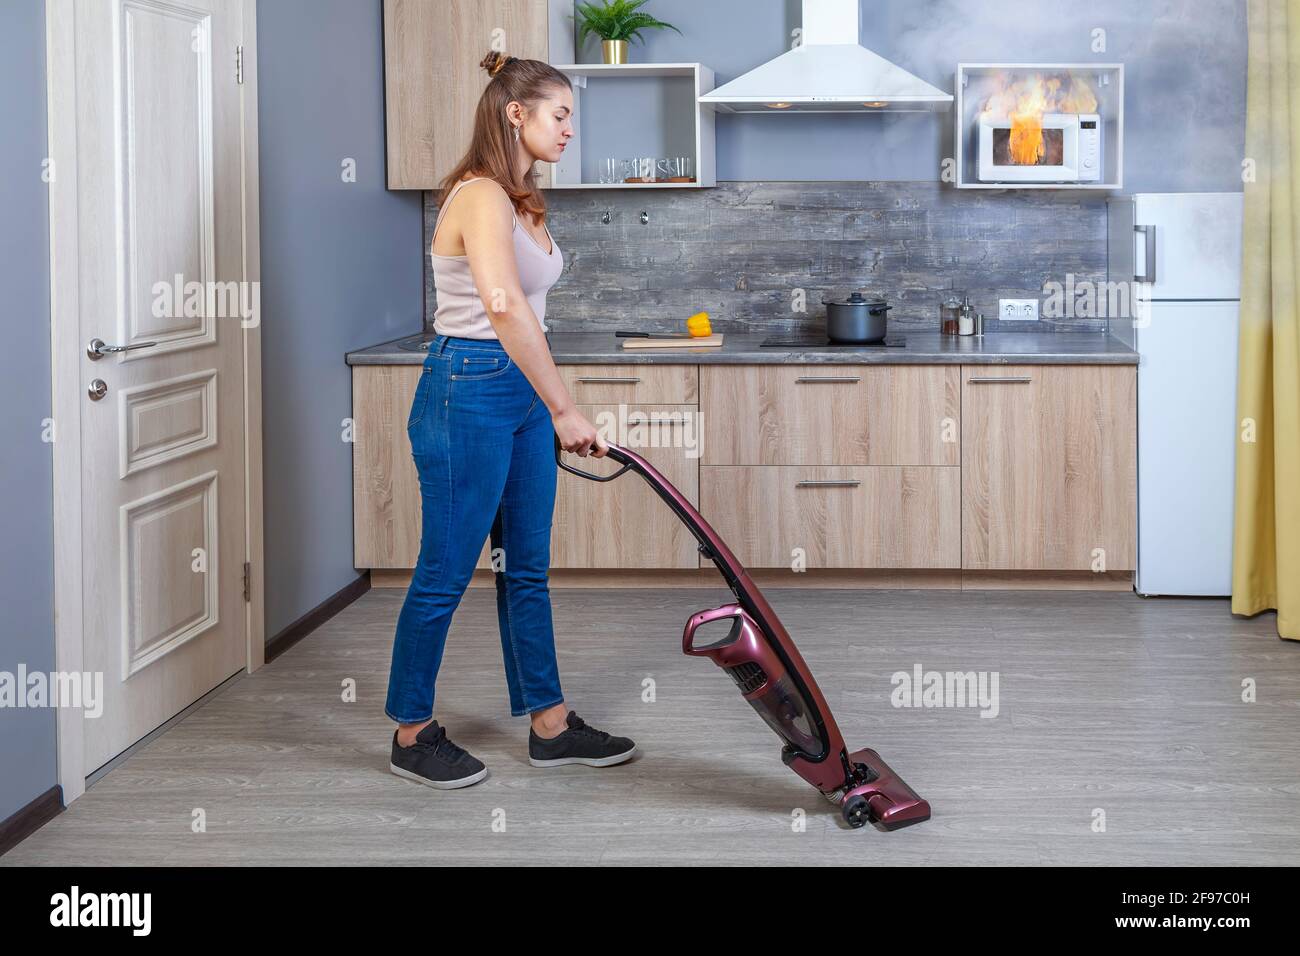 Microwave oven burned out as result of misuse, young woman vacuums floor and does not notice that house fire has started, household appliances have Stock Photo